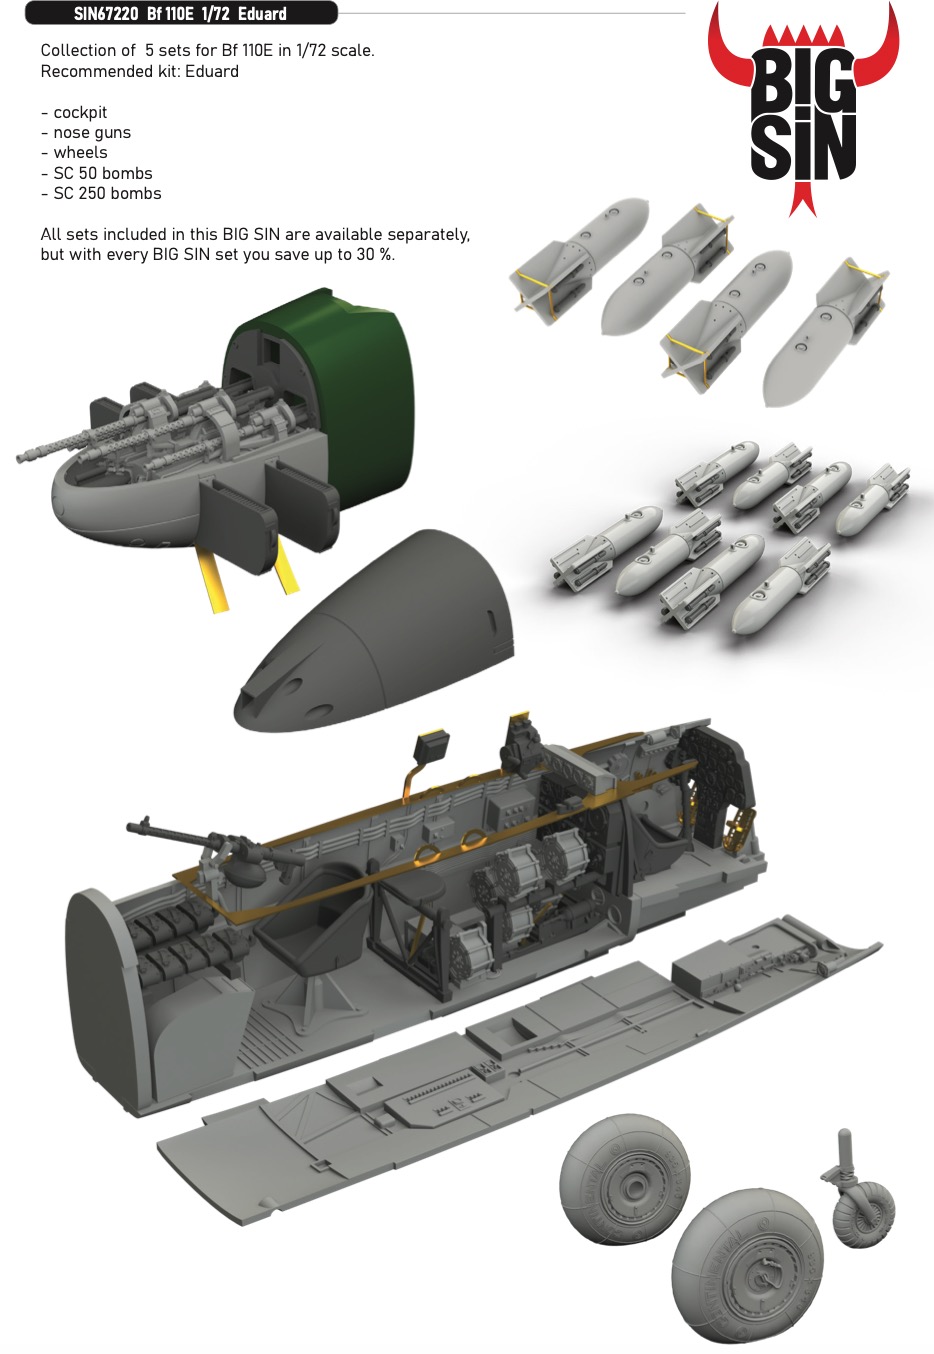 Additions (3D resin printing) 1/72 Messerschmitt Bf-110E (designed to be used with Eduard kits) This Big-Sin set